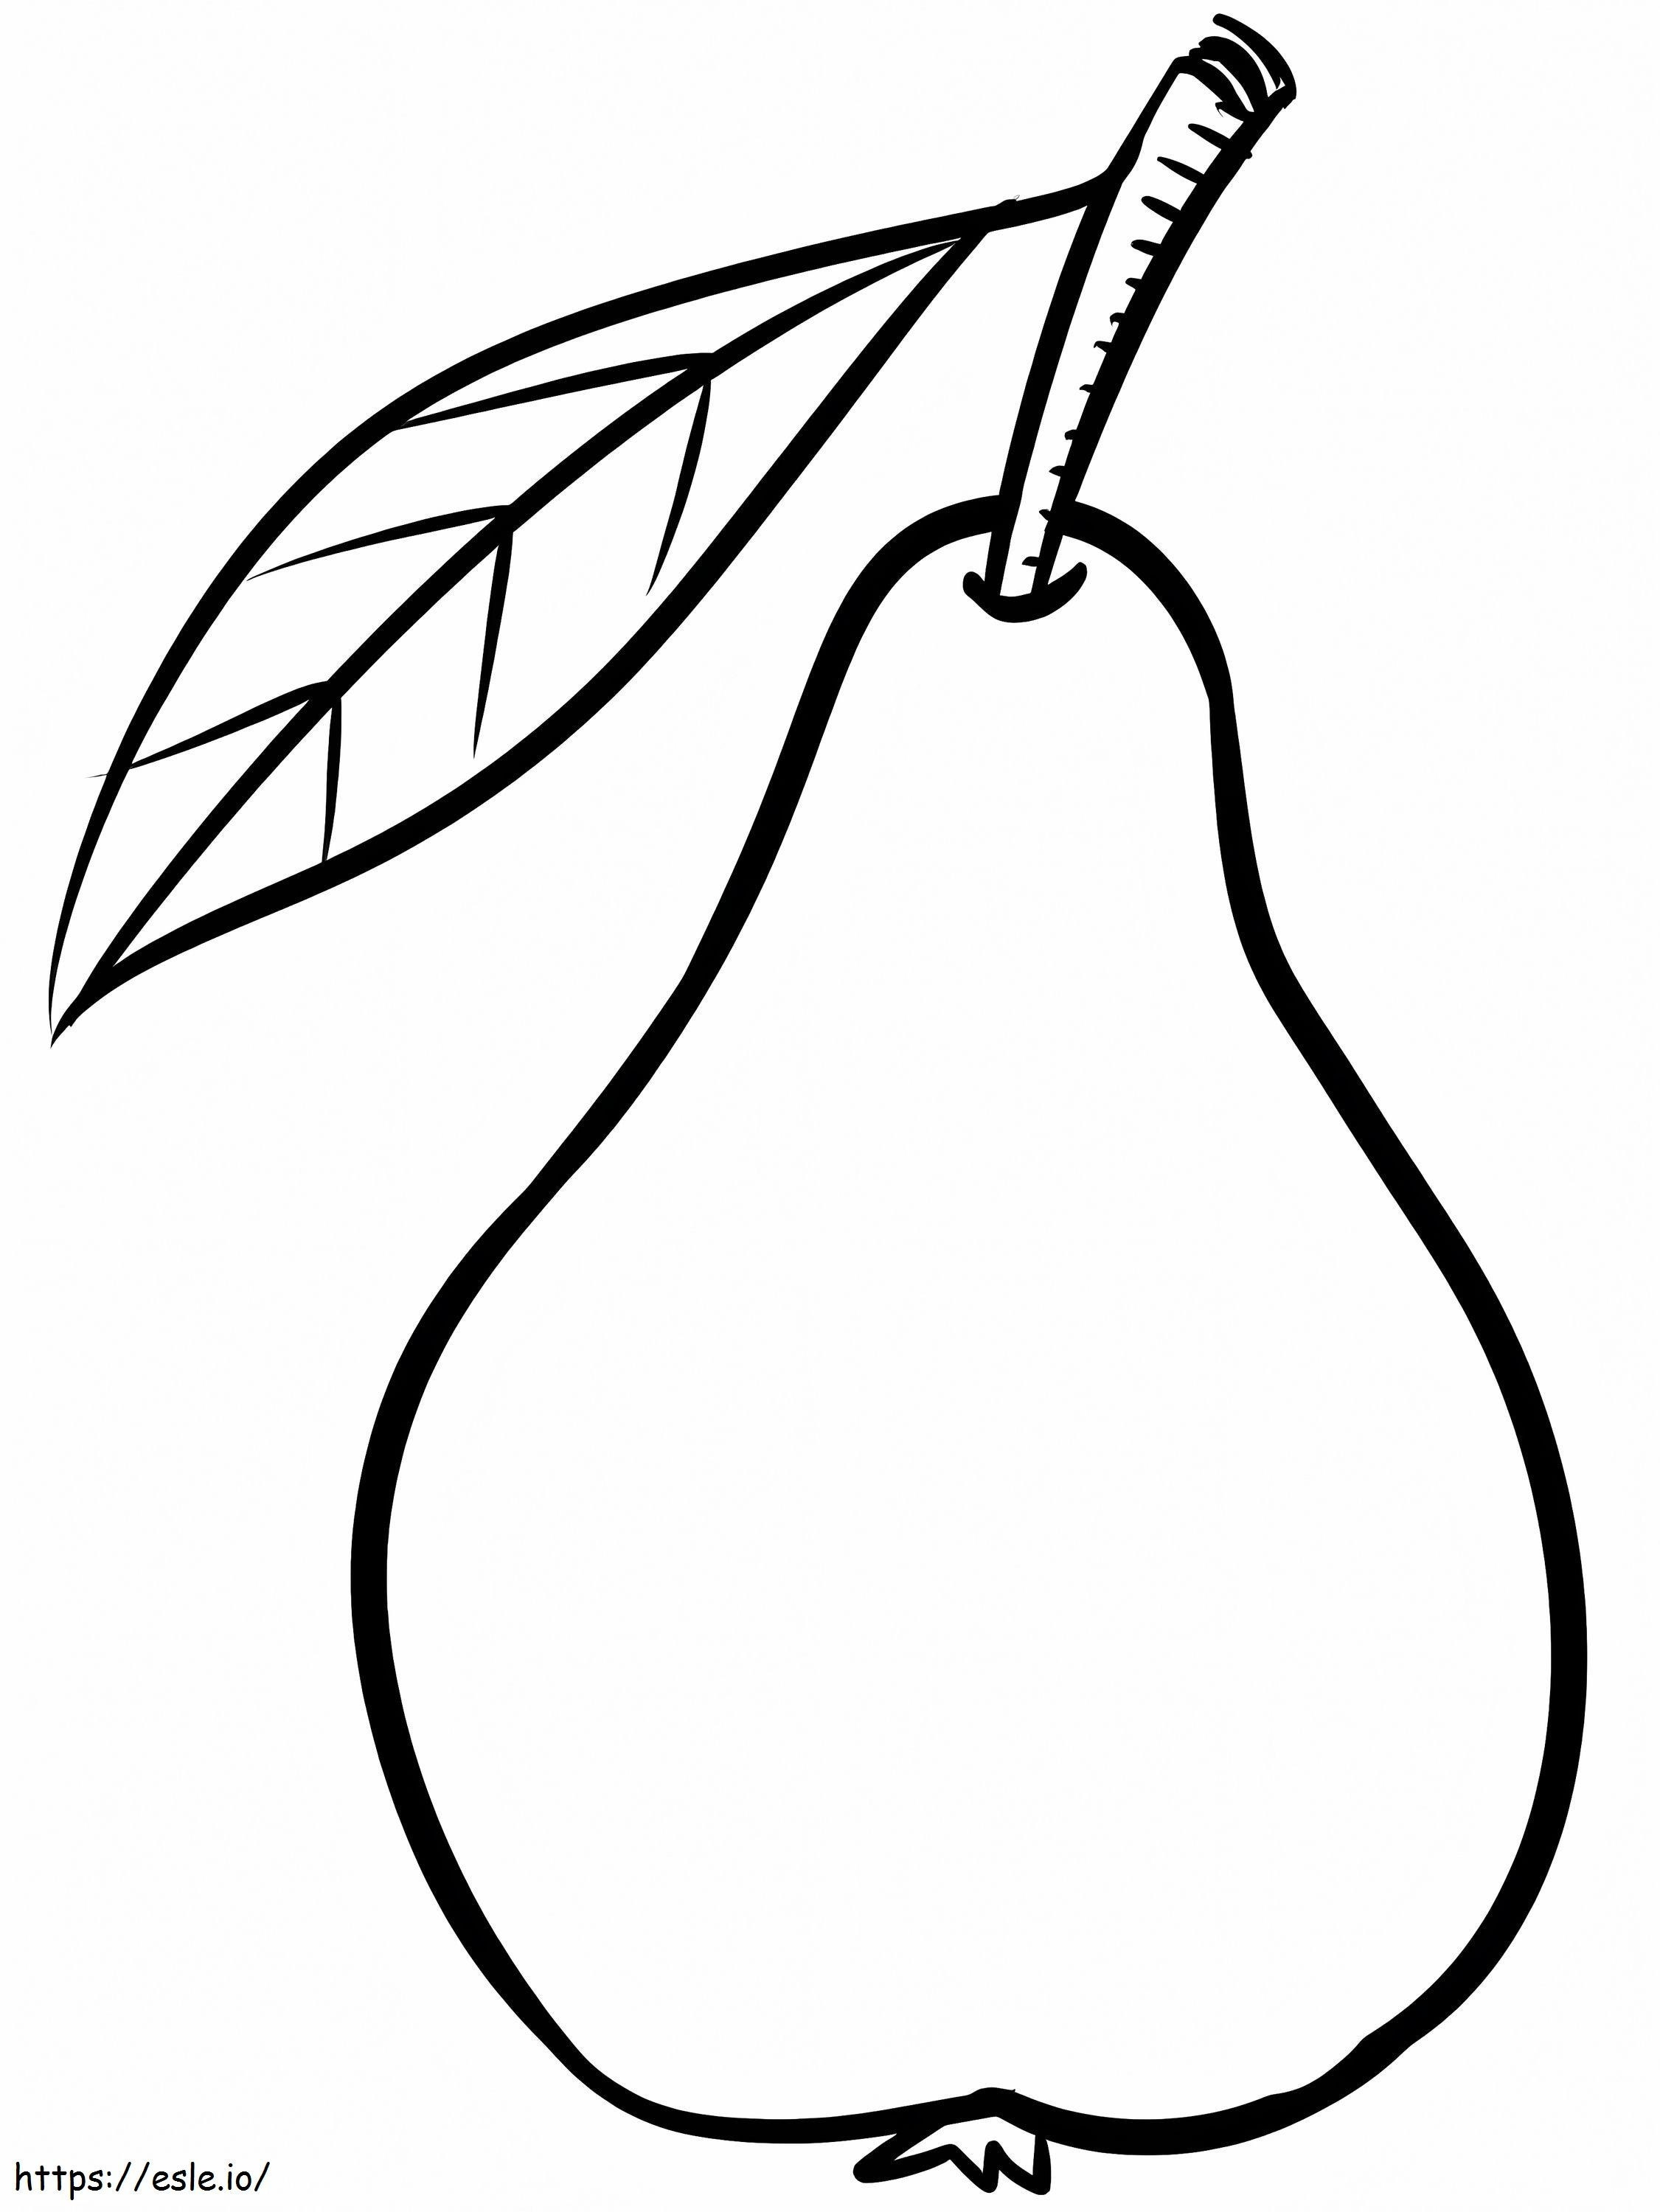 Simple Pear Fruit 3 coloring page